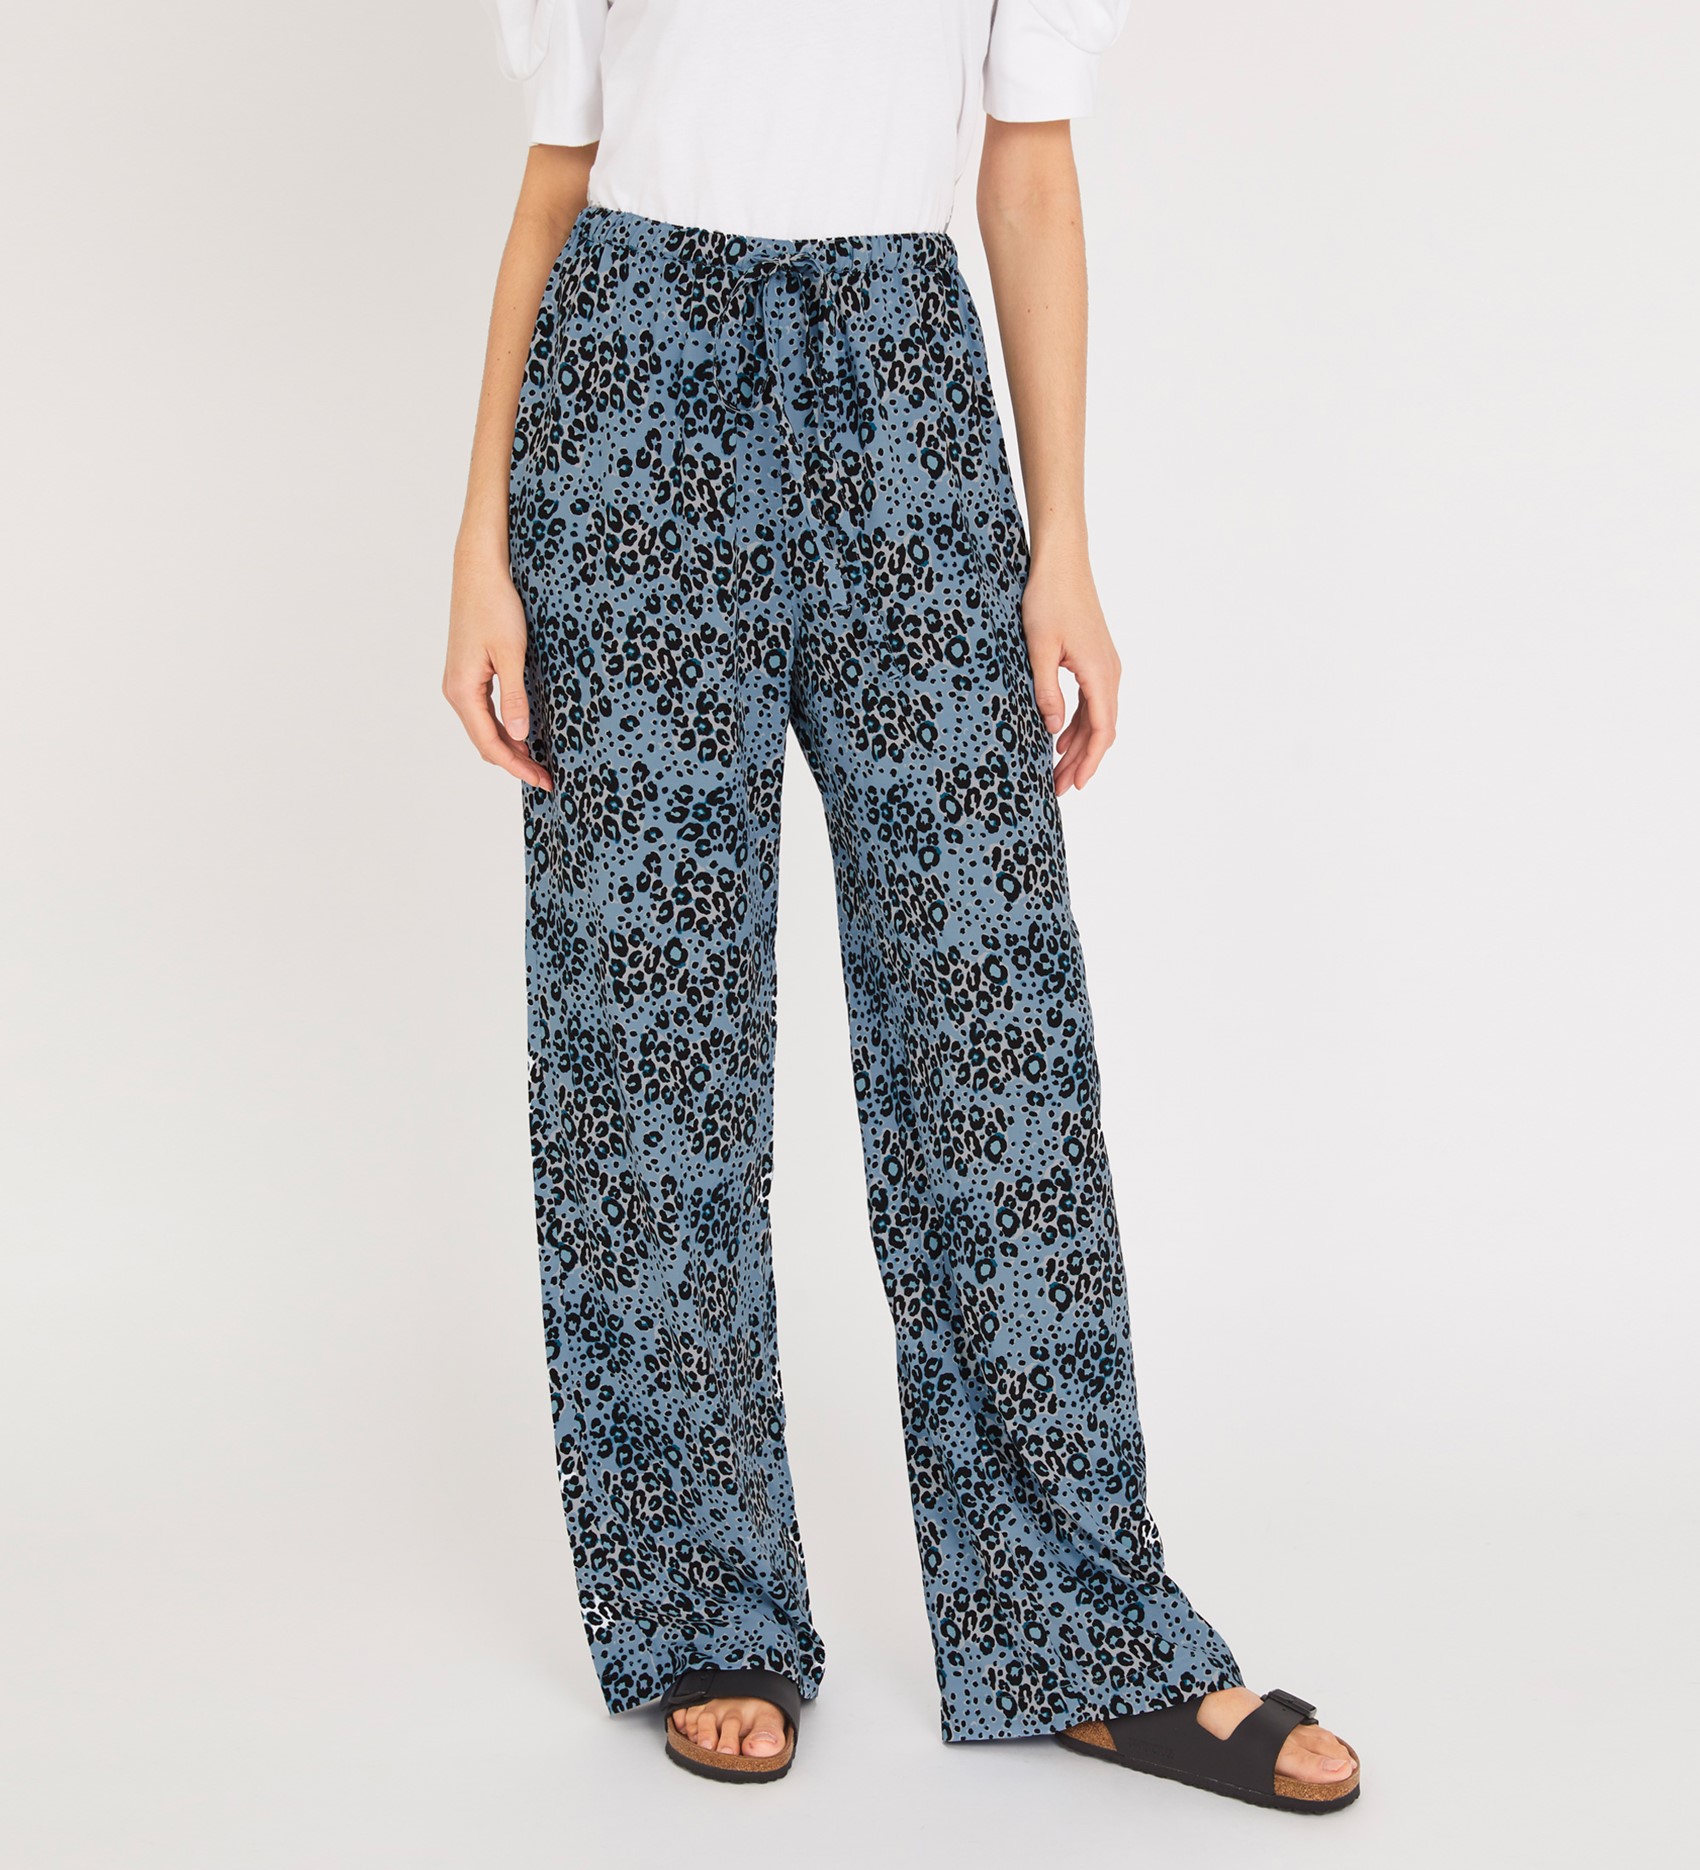 Blue Trousers Spotted Animal Print | Finery London